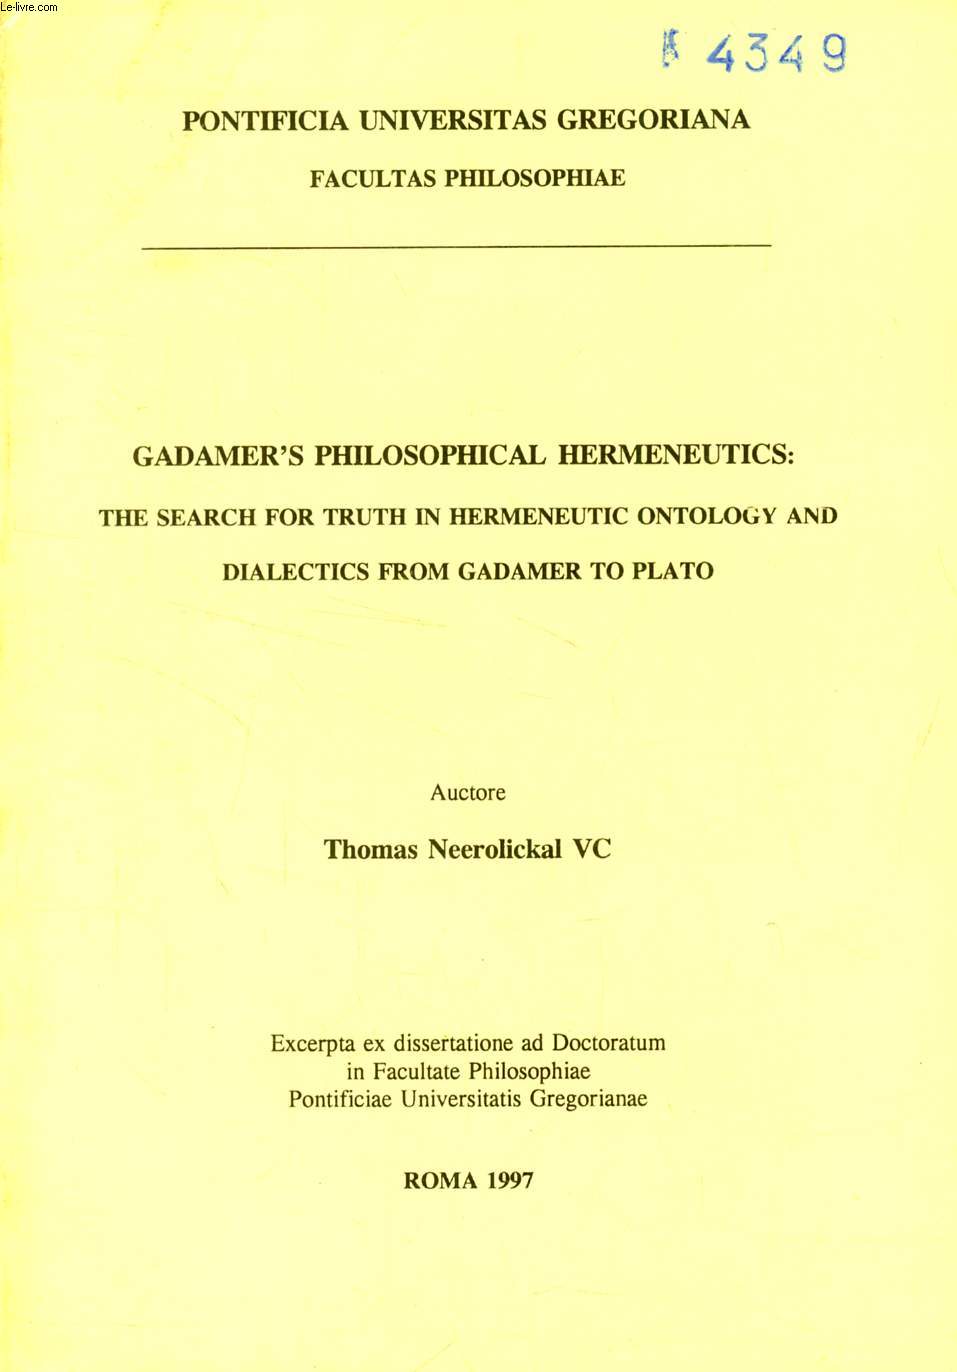 GADAMER'S PHILOSOPHICAL HERMENEUTICS: THE SEARCH FOR TRUTH IN HERMENEUTIC ONTOLOGY AND DIALECTICS FROM GADAMER TO PLATO (EXCERPTA EX DISSERTATIONE)